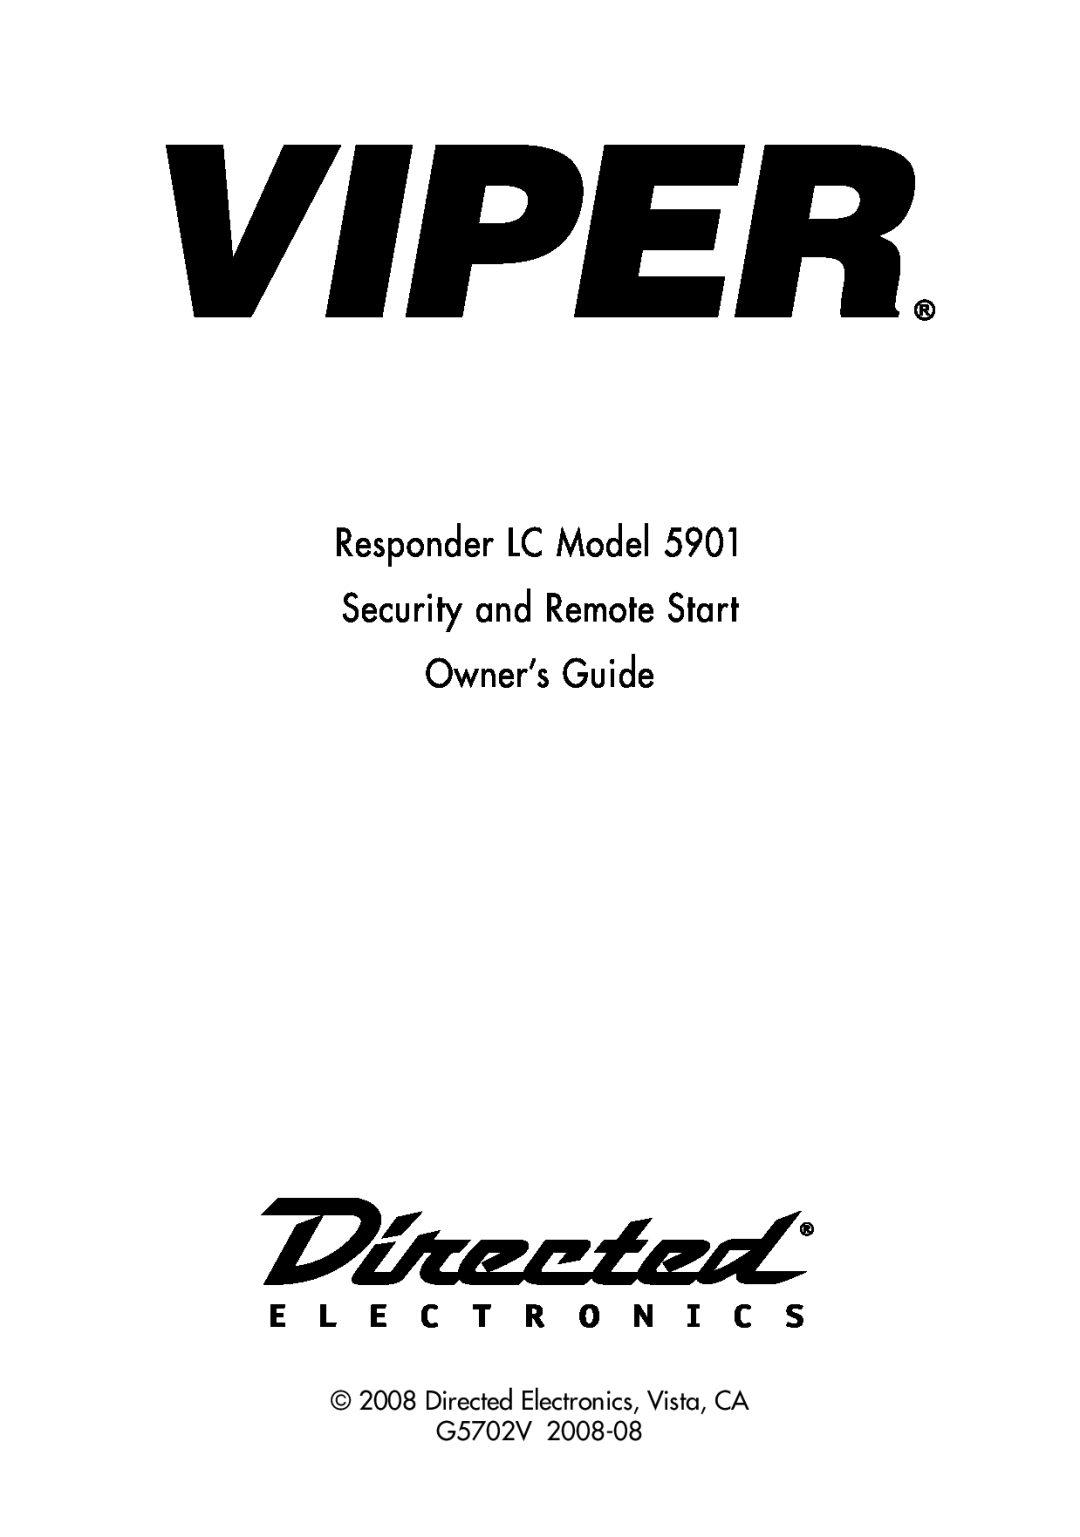 Viper 5901 manual Responder LC Model, Security and Remote Start Owner’s Guide, Directed Electronics, Vista, CA G5702V 